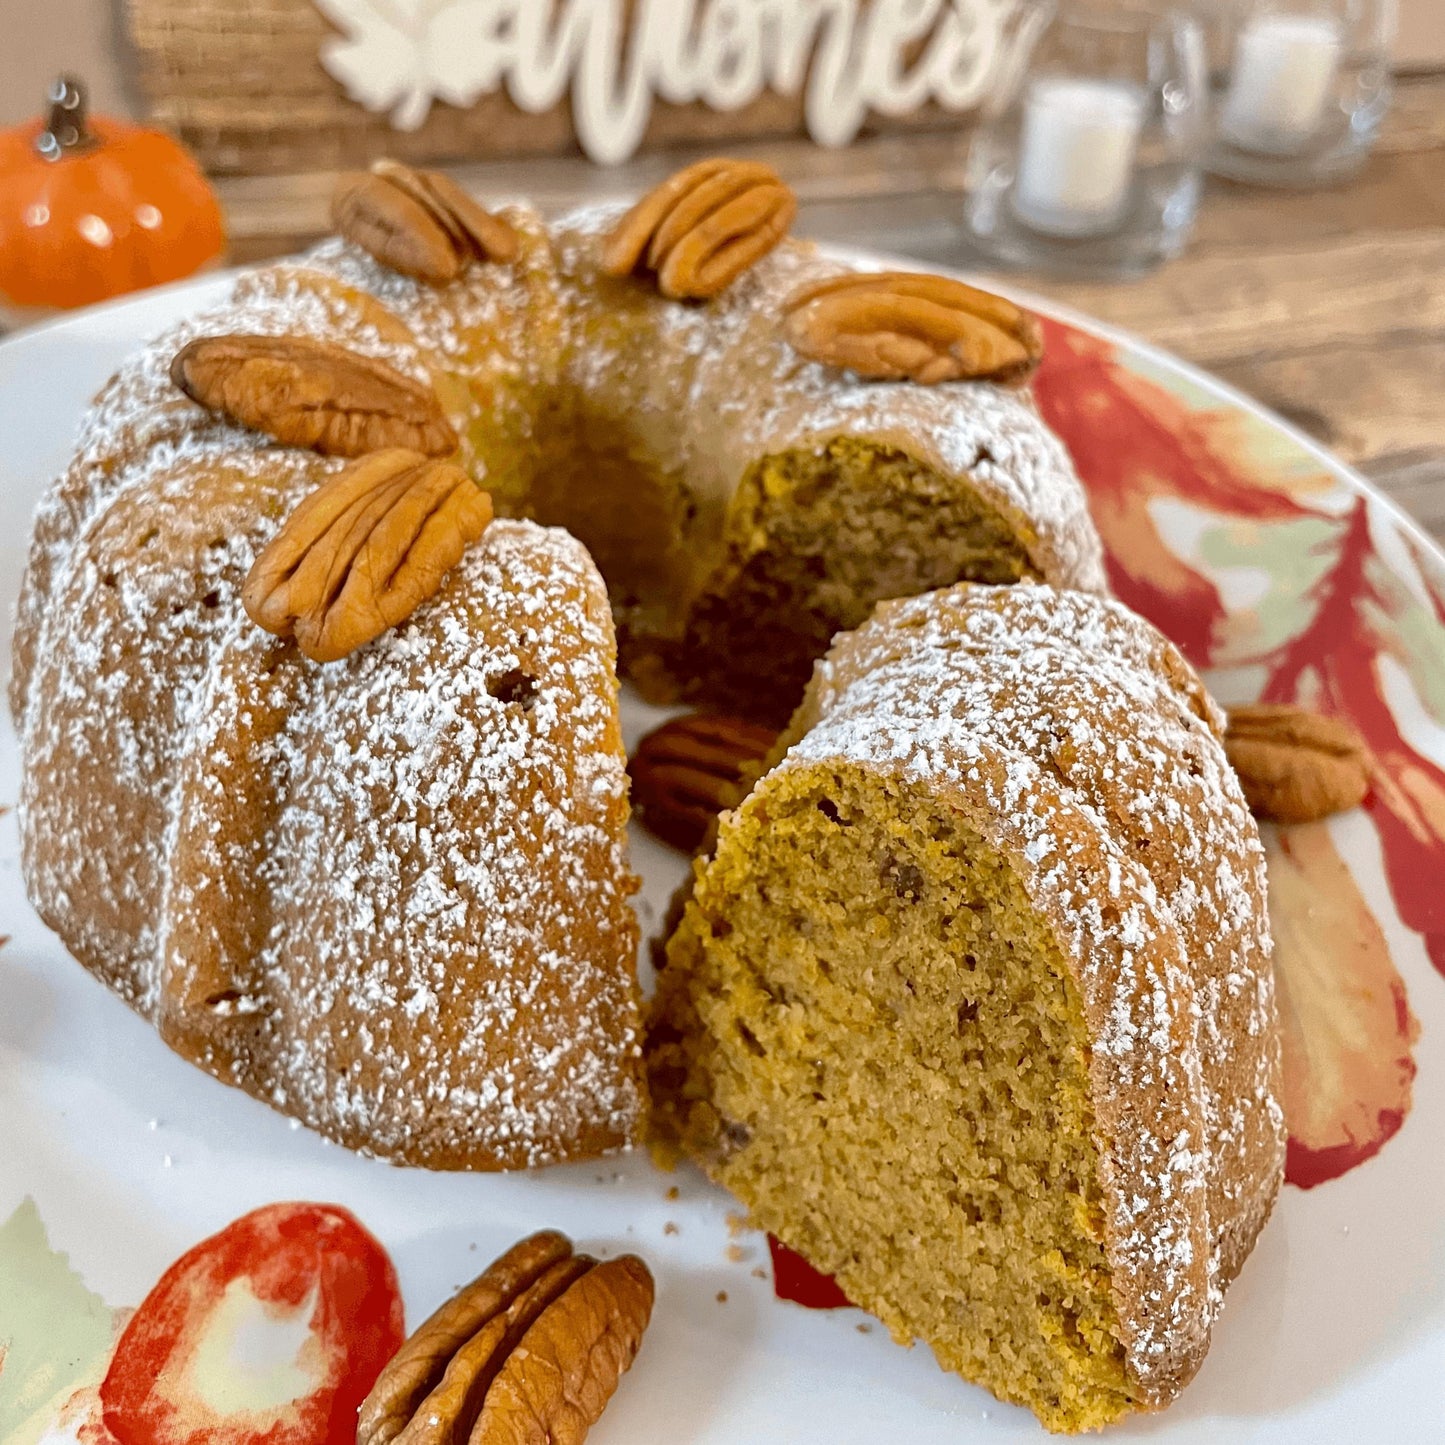 
                  
                    Gluten-free, dairy-free, sugar-free Pumpkin Cinnamon Delight Full Life Cake with a sugar-free caramel syrup topping and crunchy pecans, capturing the essence of Thanksgiving flavors. Full Life Gourmet Bakery
                  
                